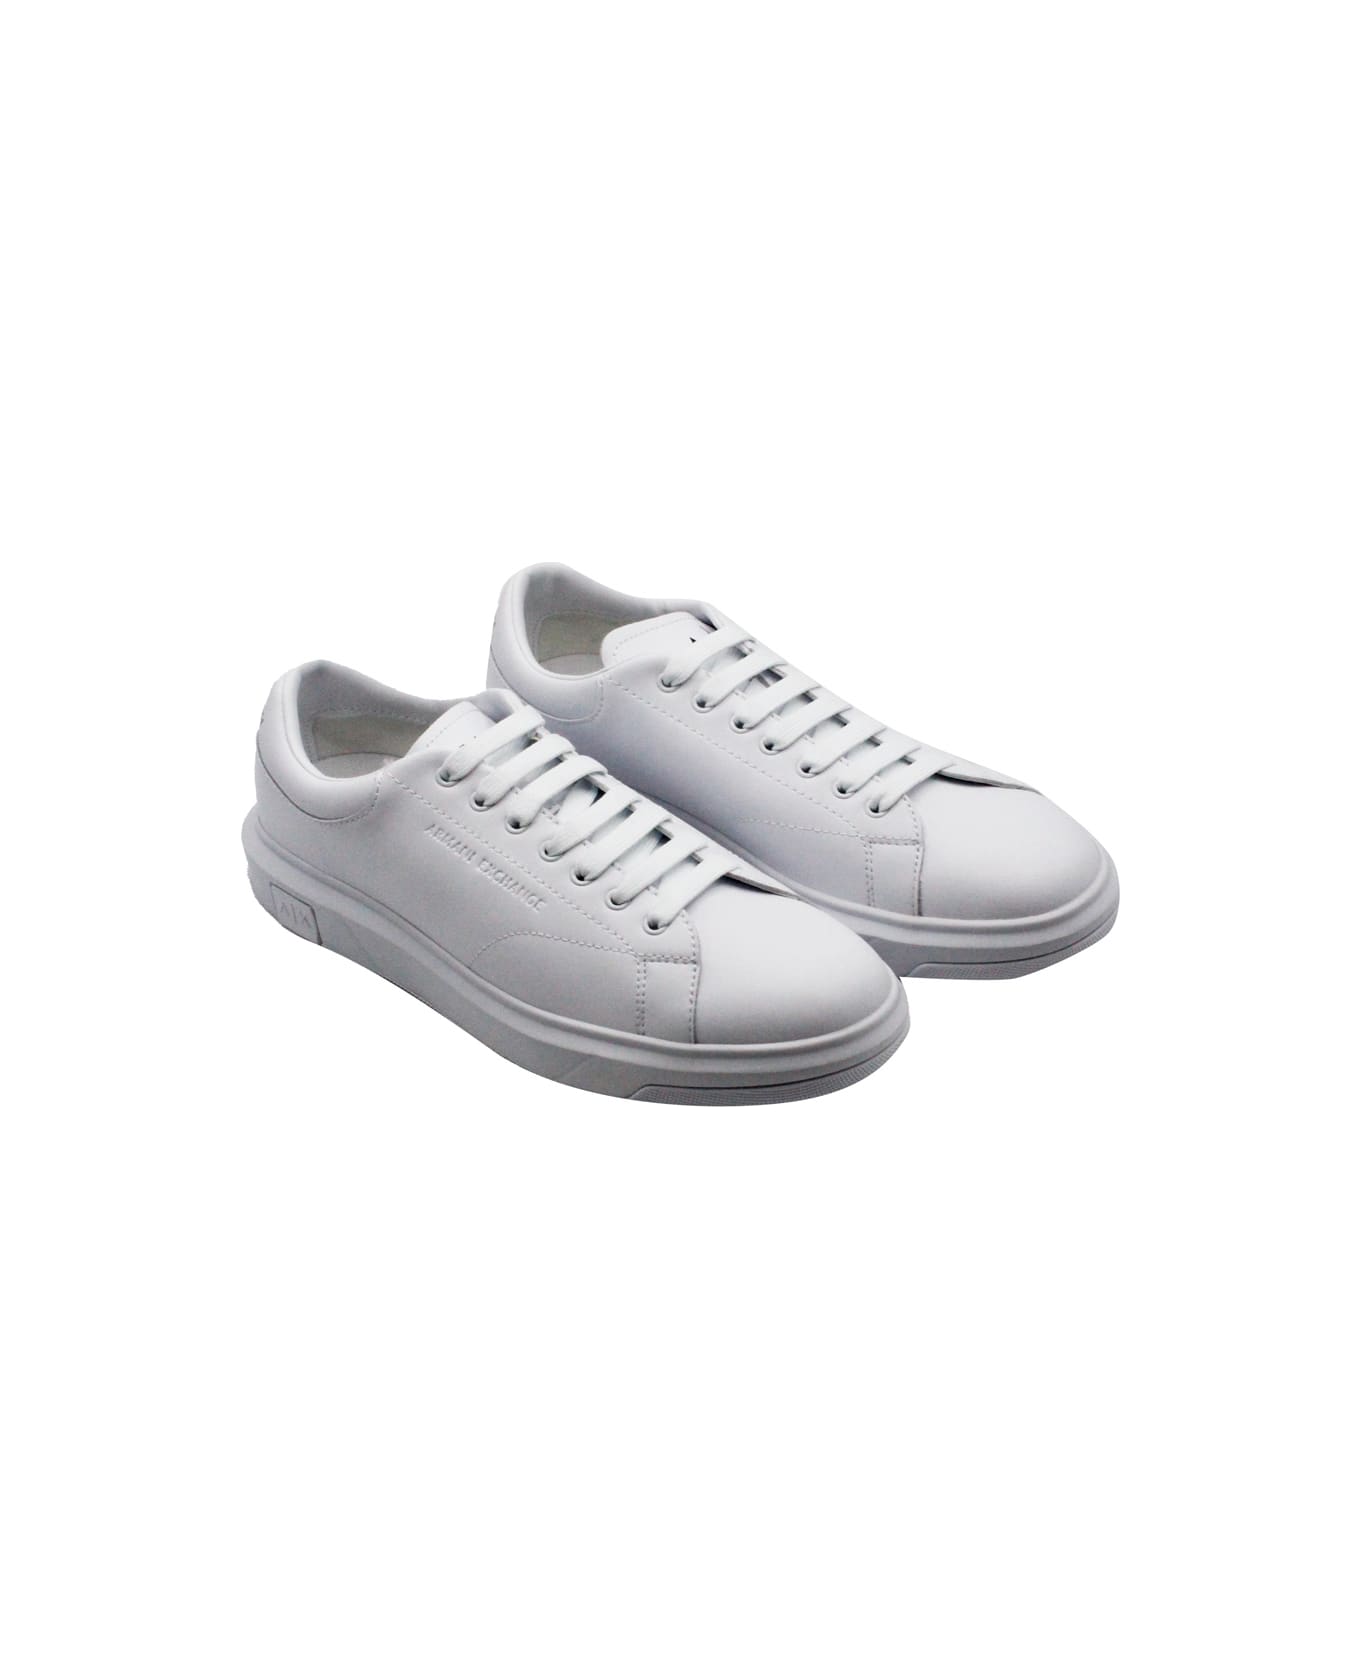 Armani Collezioni Leather Sneakers With Matching Box Sole And Lace Closure. Small Logo On The Tongue And Back - White